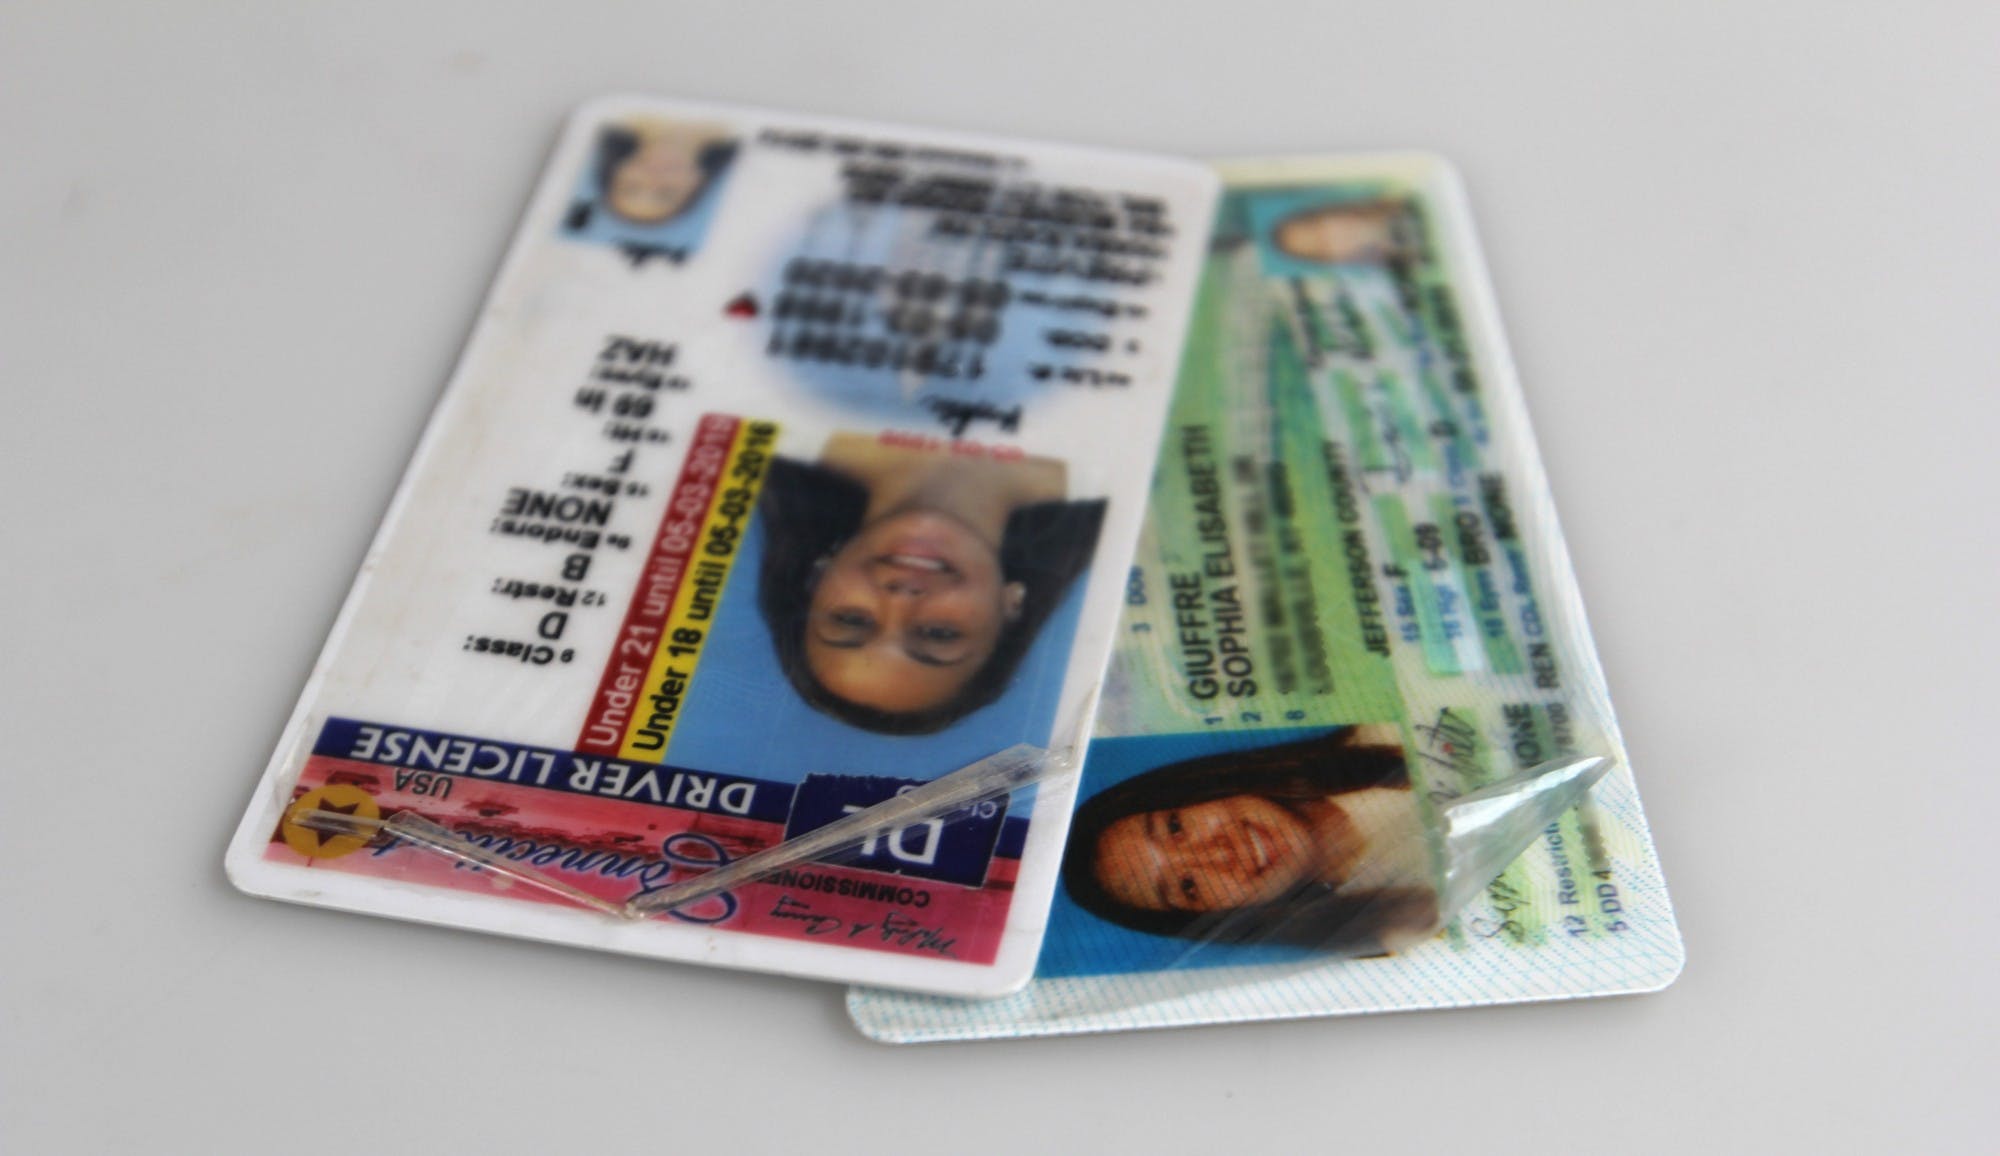 How To Make A Delaware Fake Id